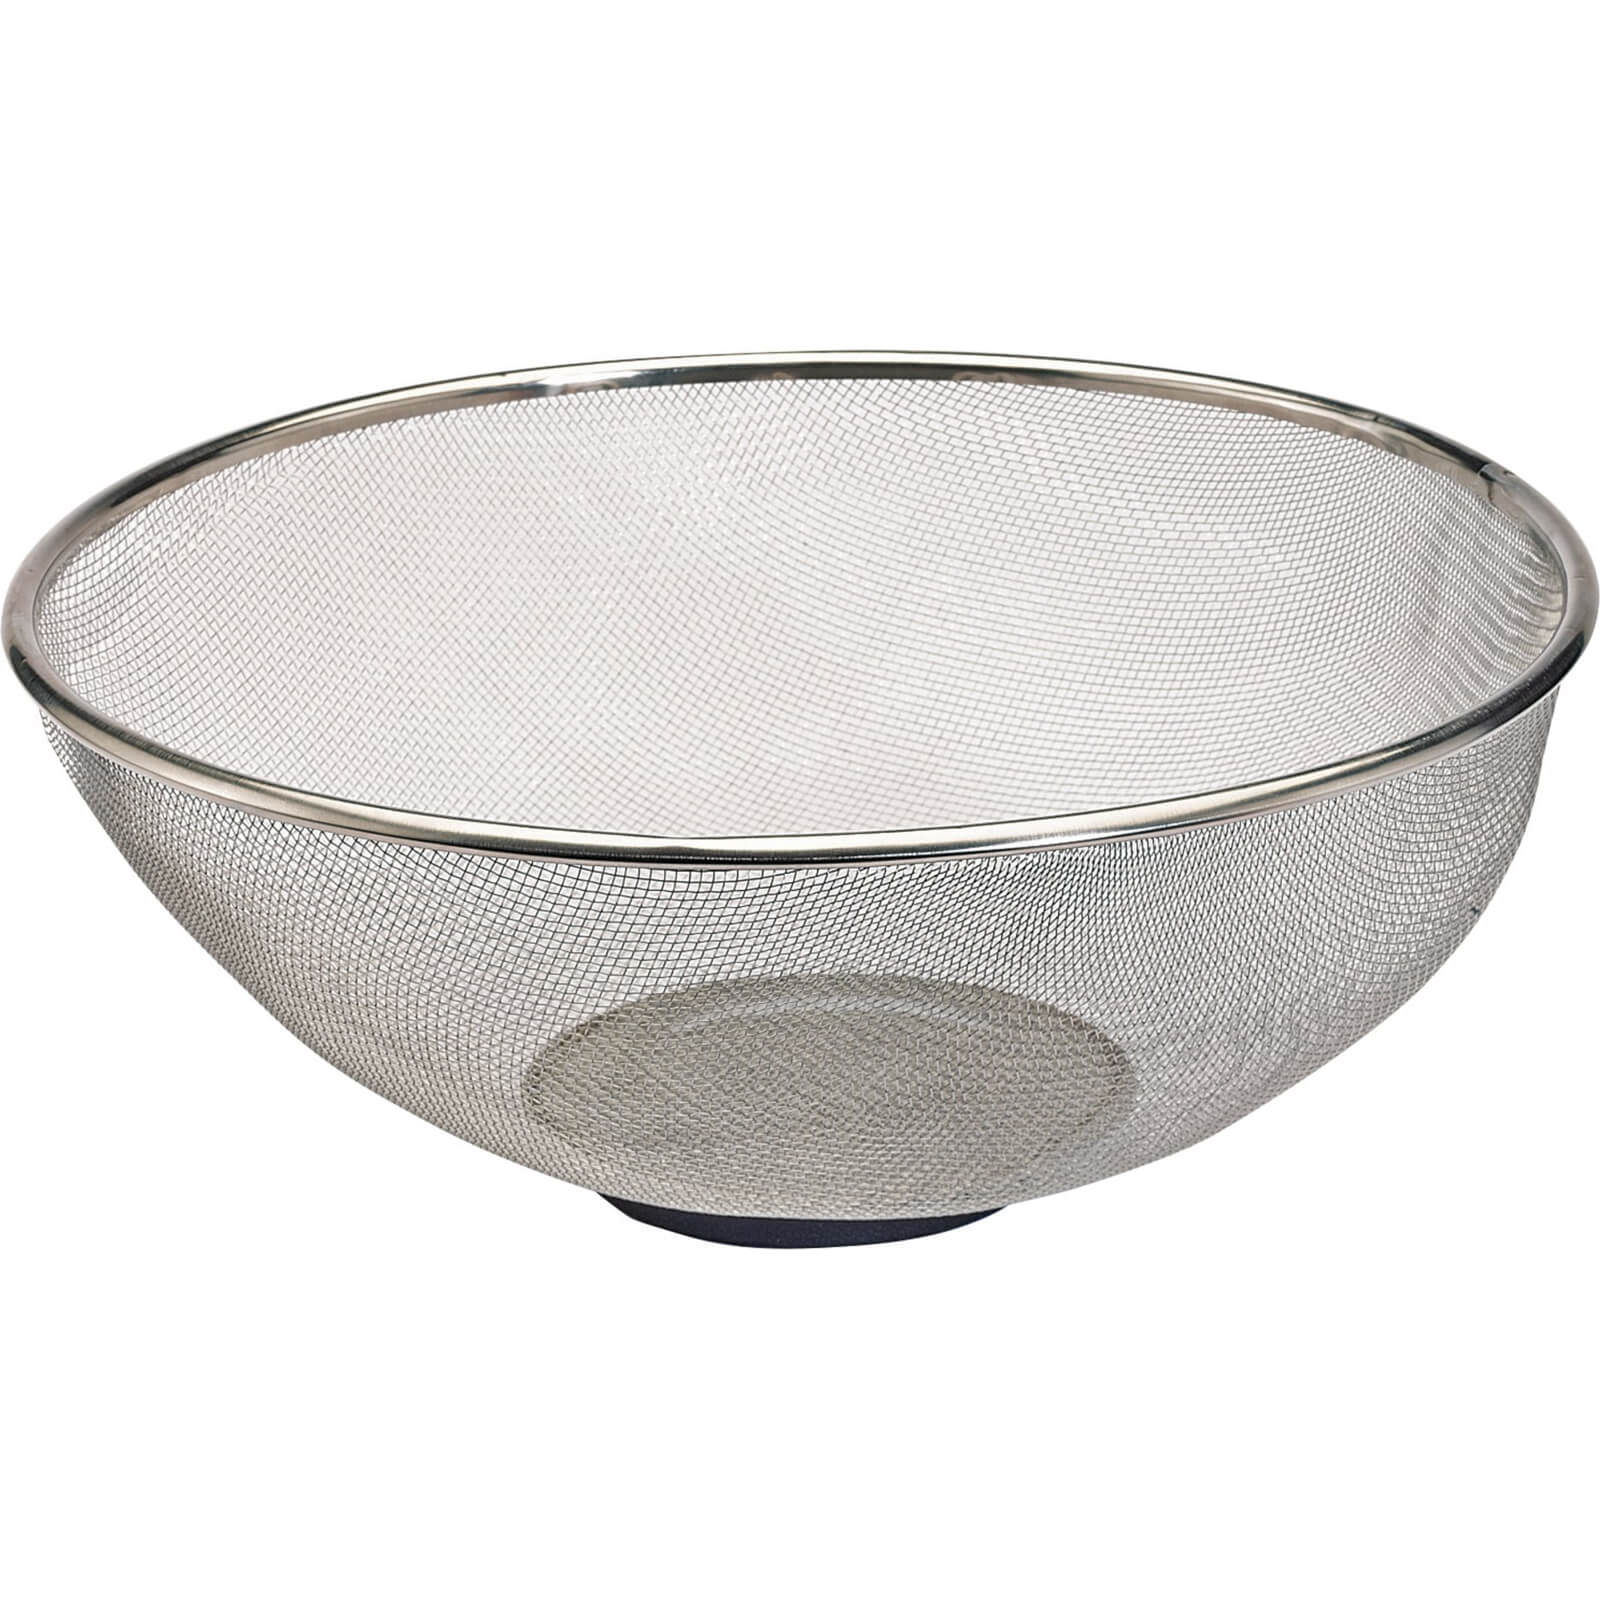 Image of Draper Magnetic Stainless Steel Mesh Parts Bowl